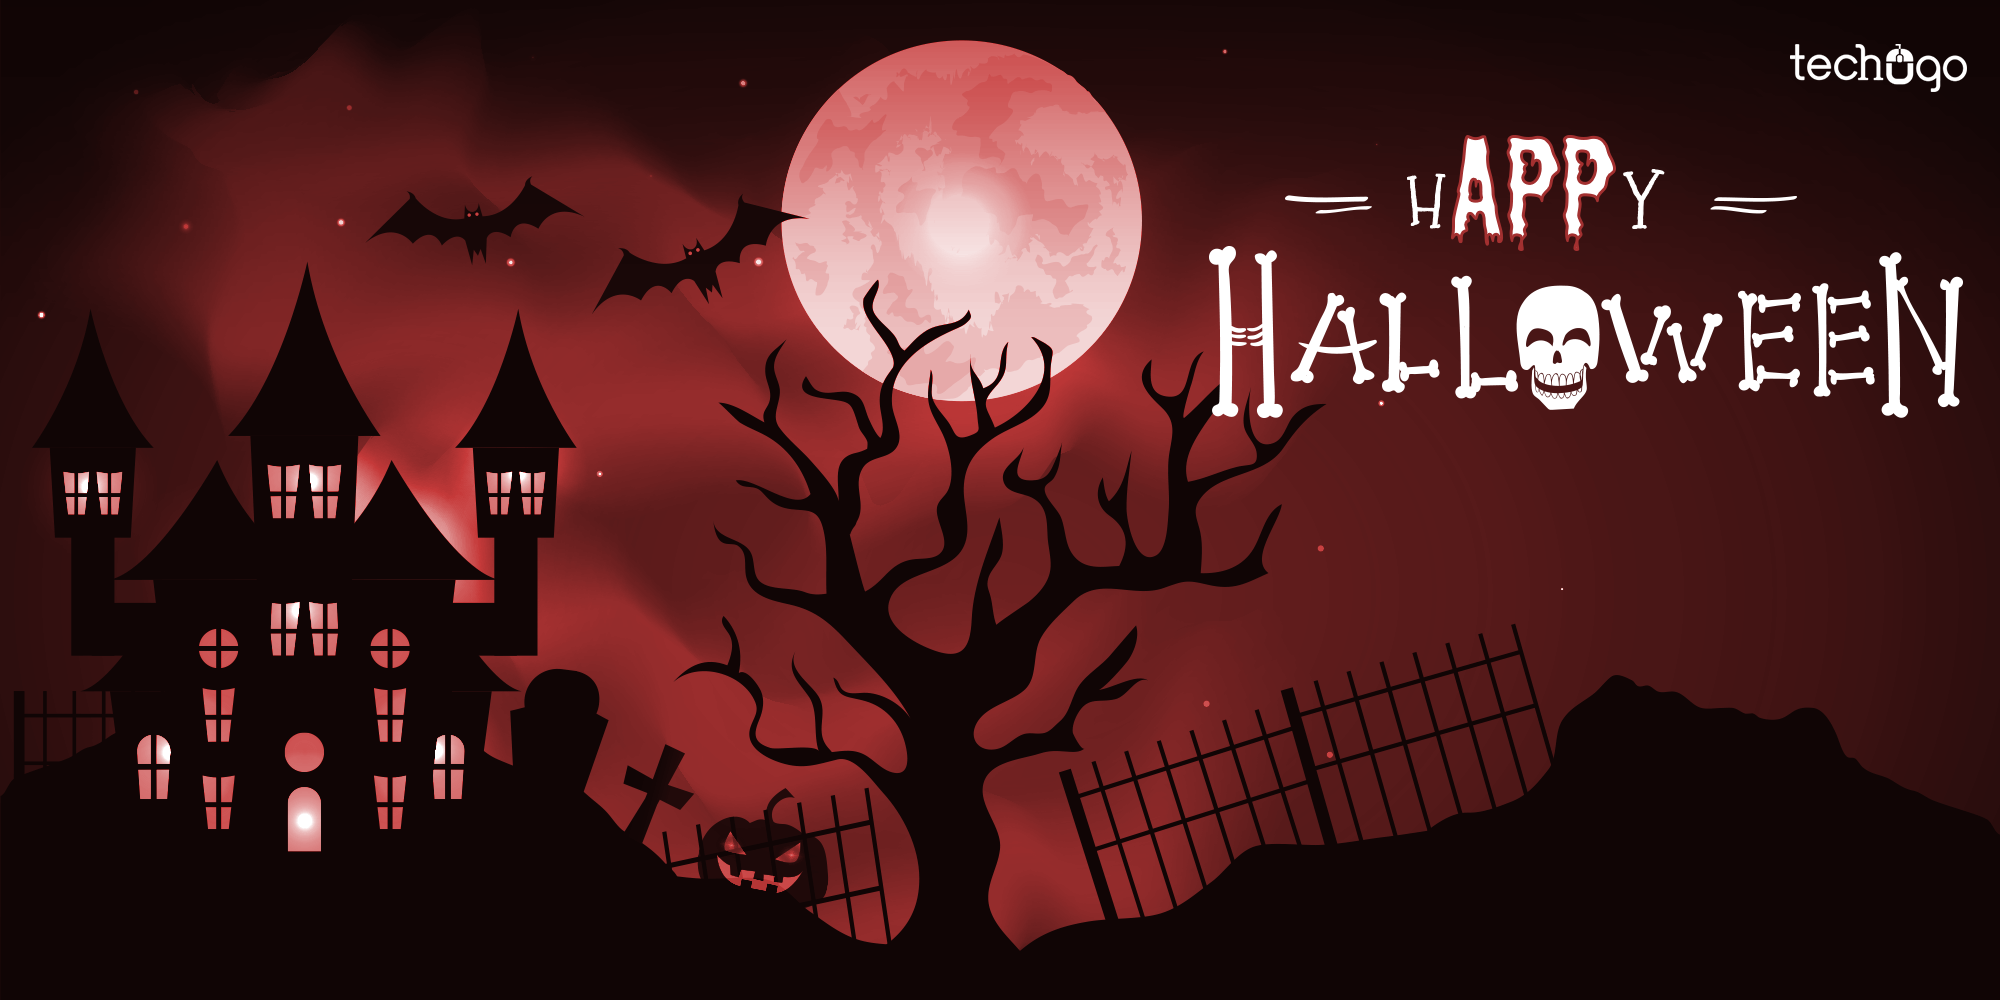 Enjoy A Spooky Halloween Night With These Mobile Apps